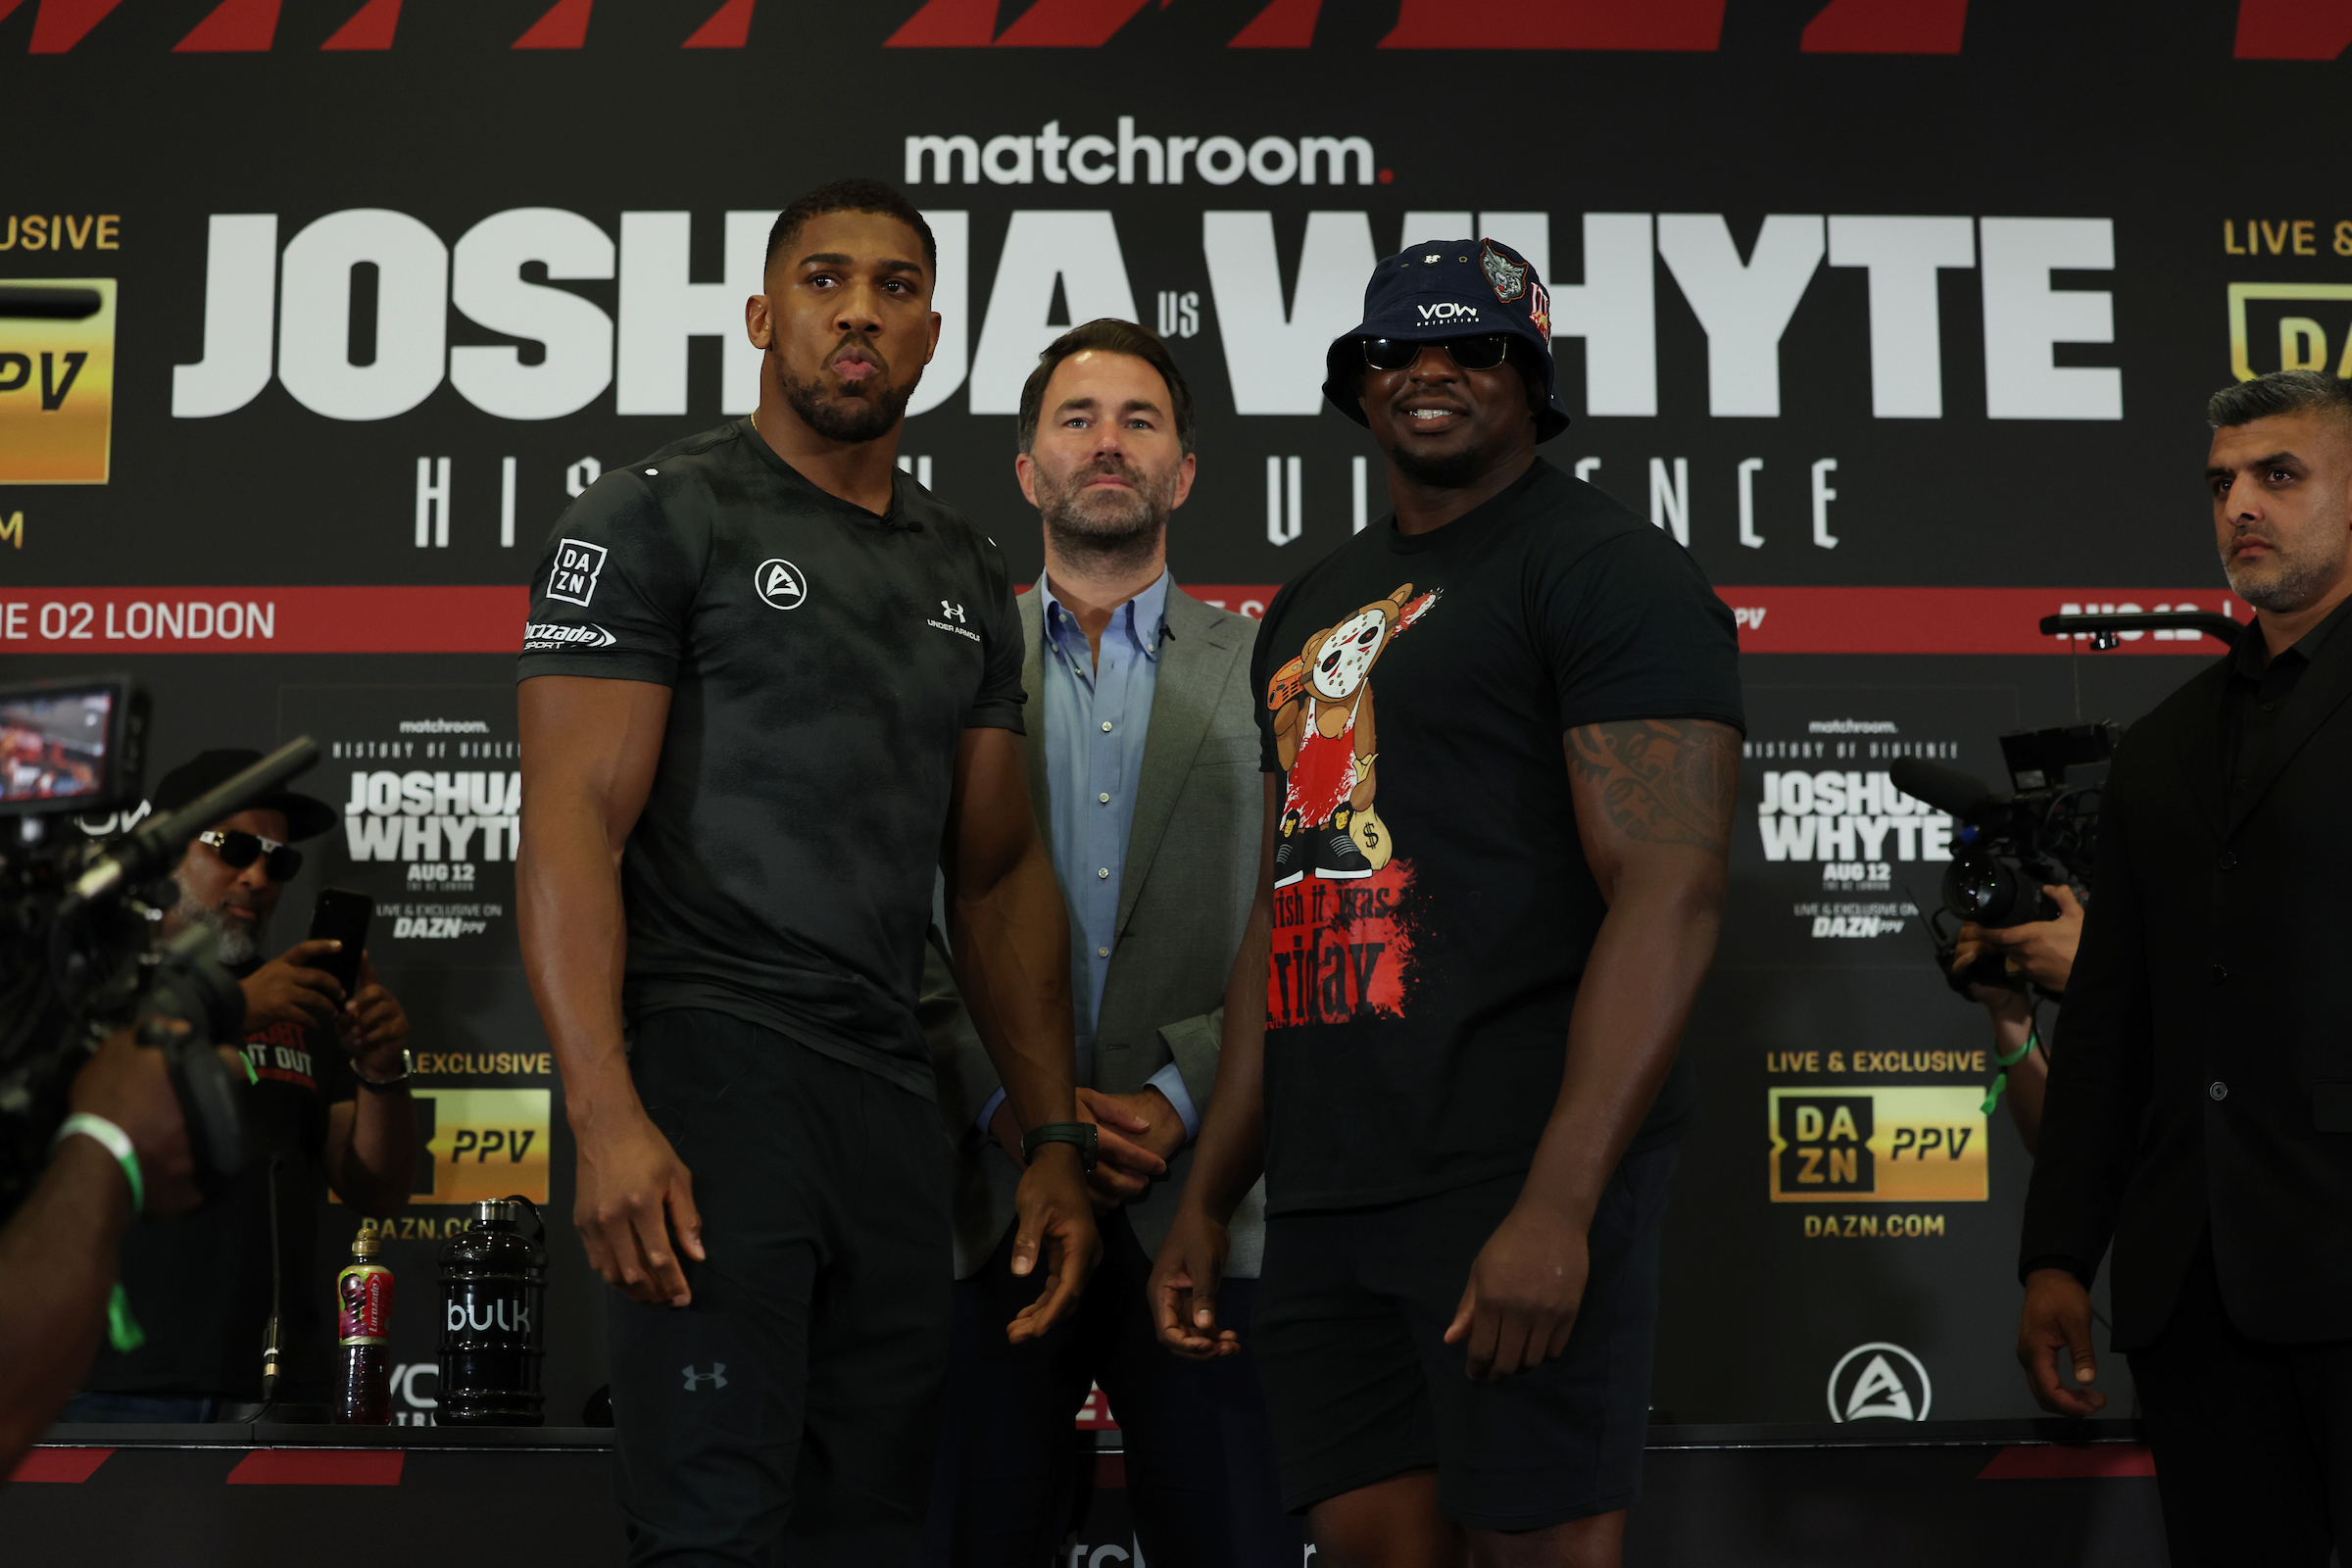 Joshua and Whyte square up ahead of August 12 sell-out in London 